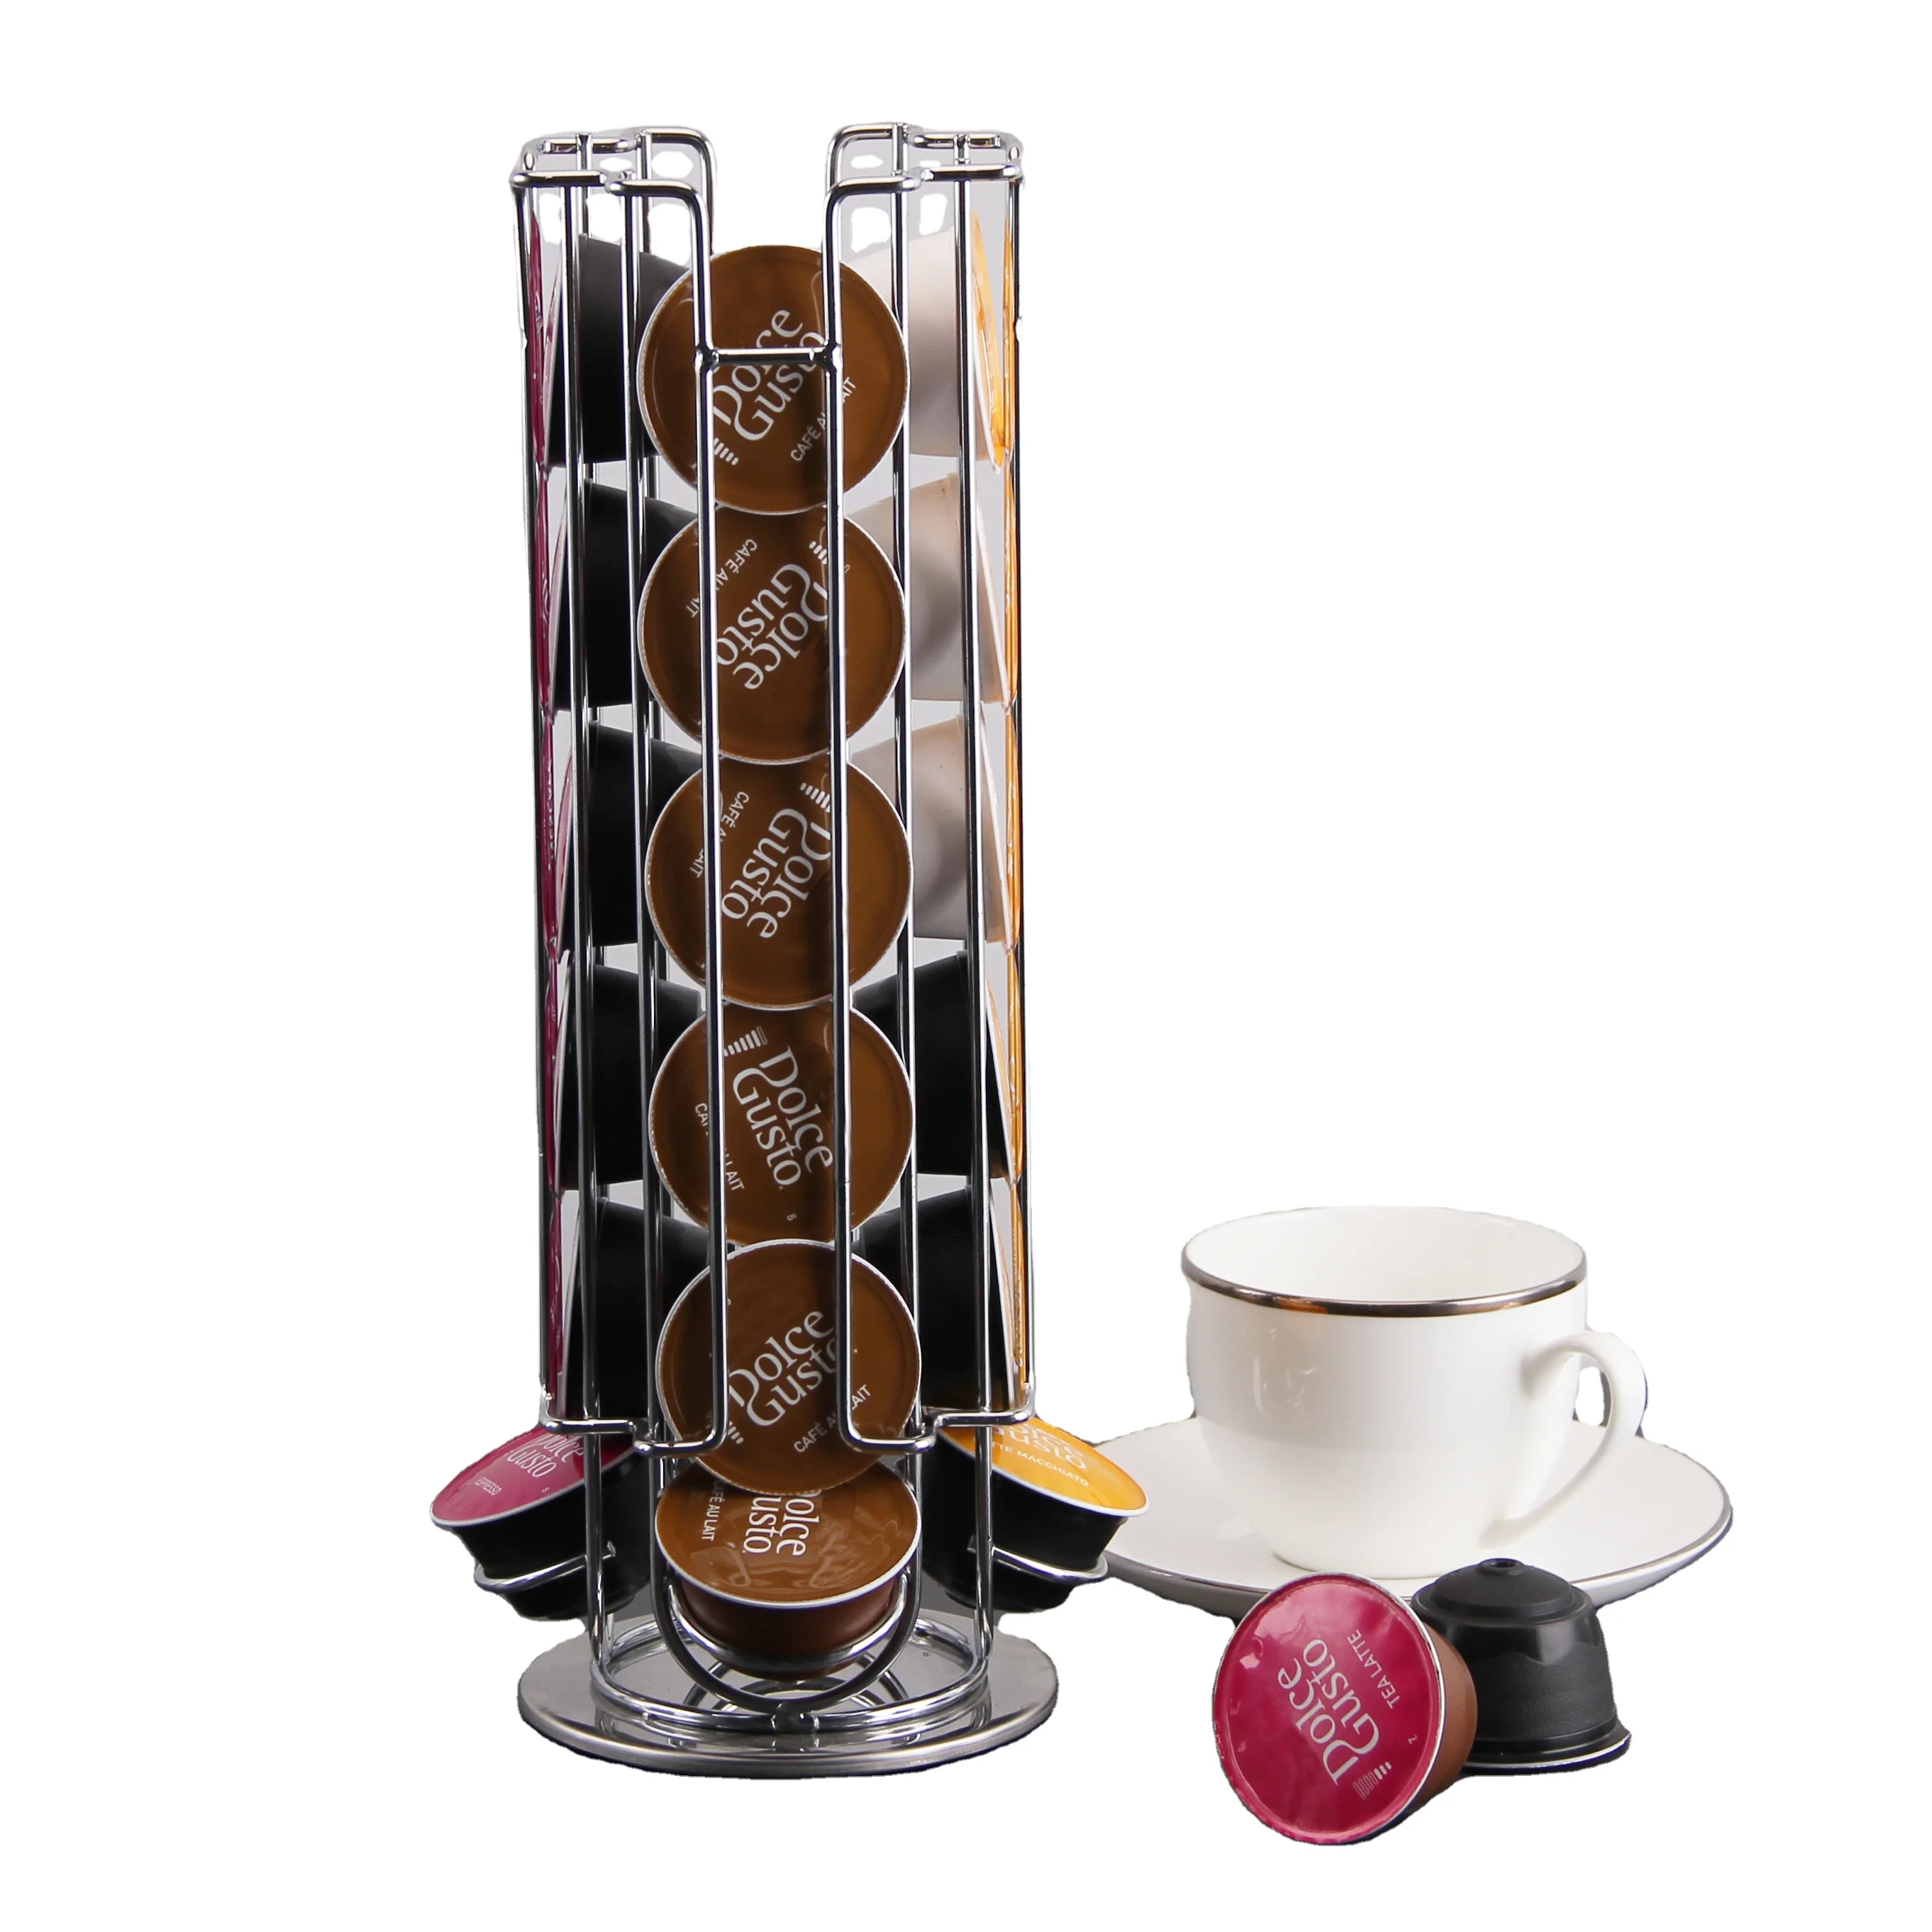 Dolce Gusto Nescafe Dolce Gusto Coffee Pods Dispenser Capsule Holder Stand Rack Rotating 